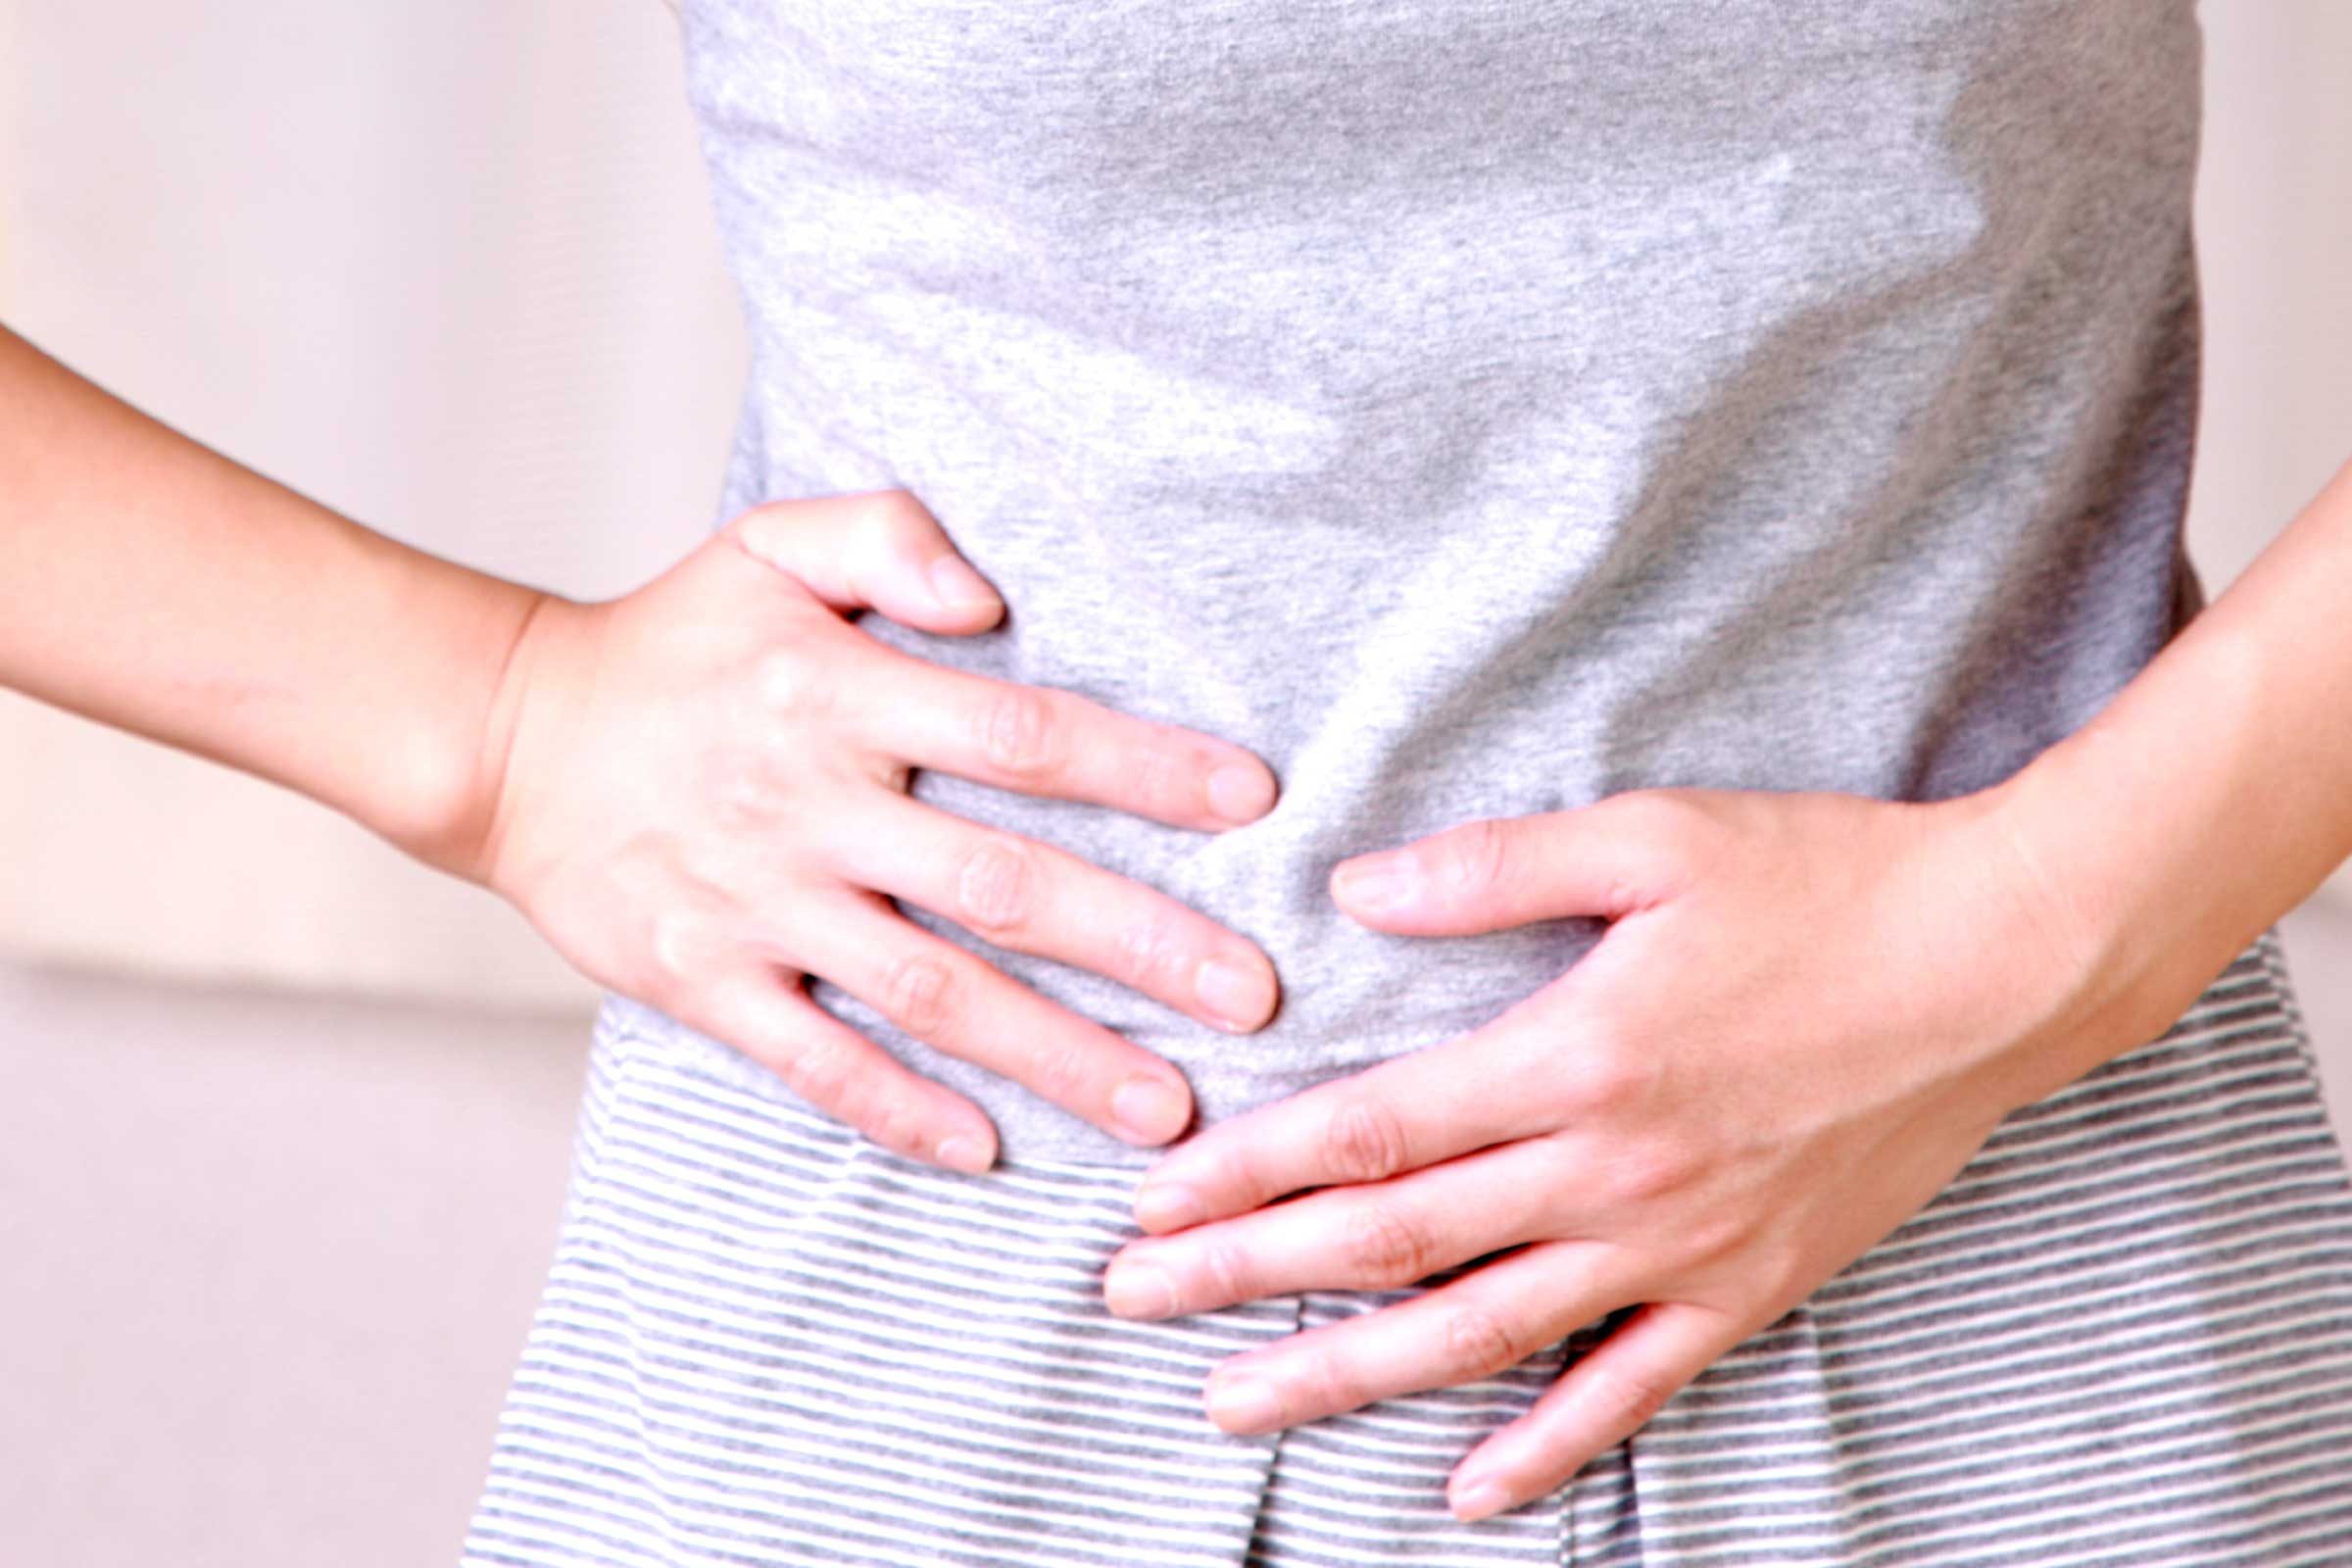 7 Stomach Pains and What They Mean